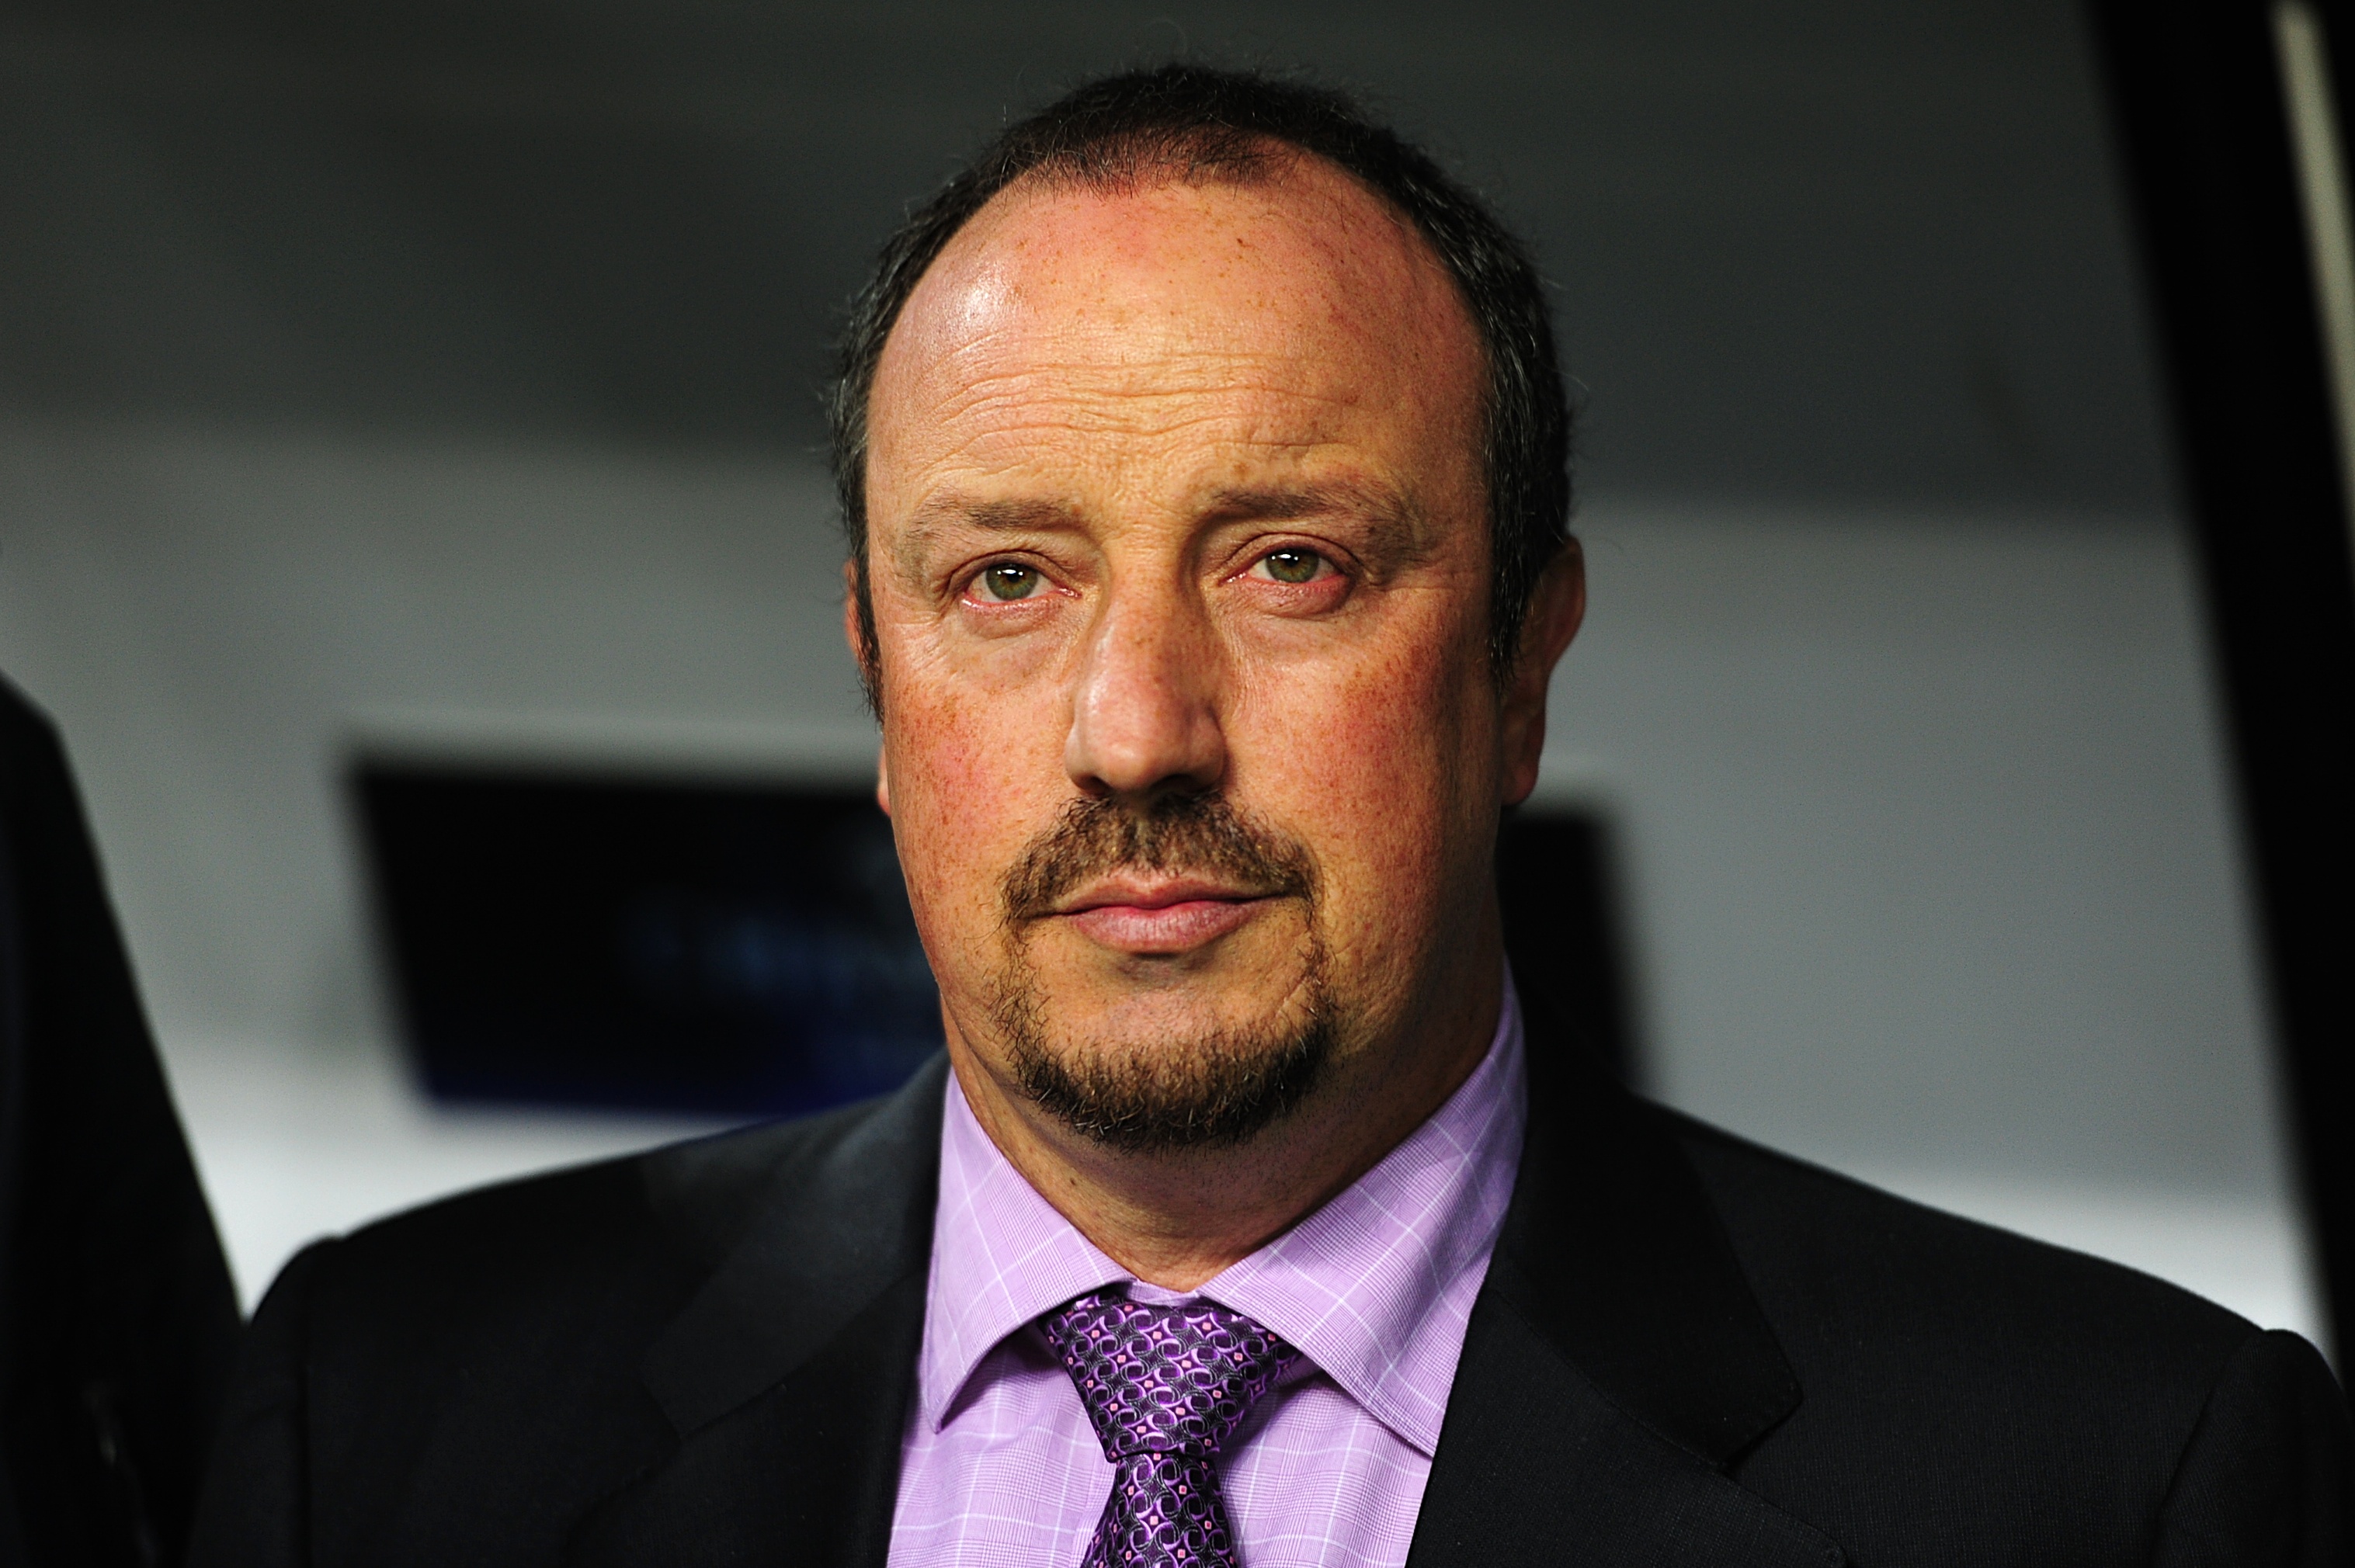 Benitez, who had a spell at Chelsea, is back in management